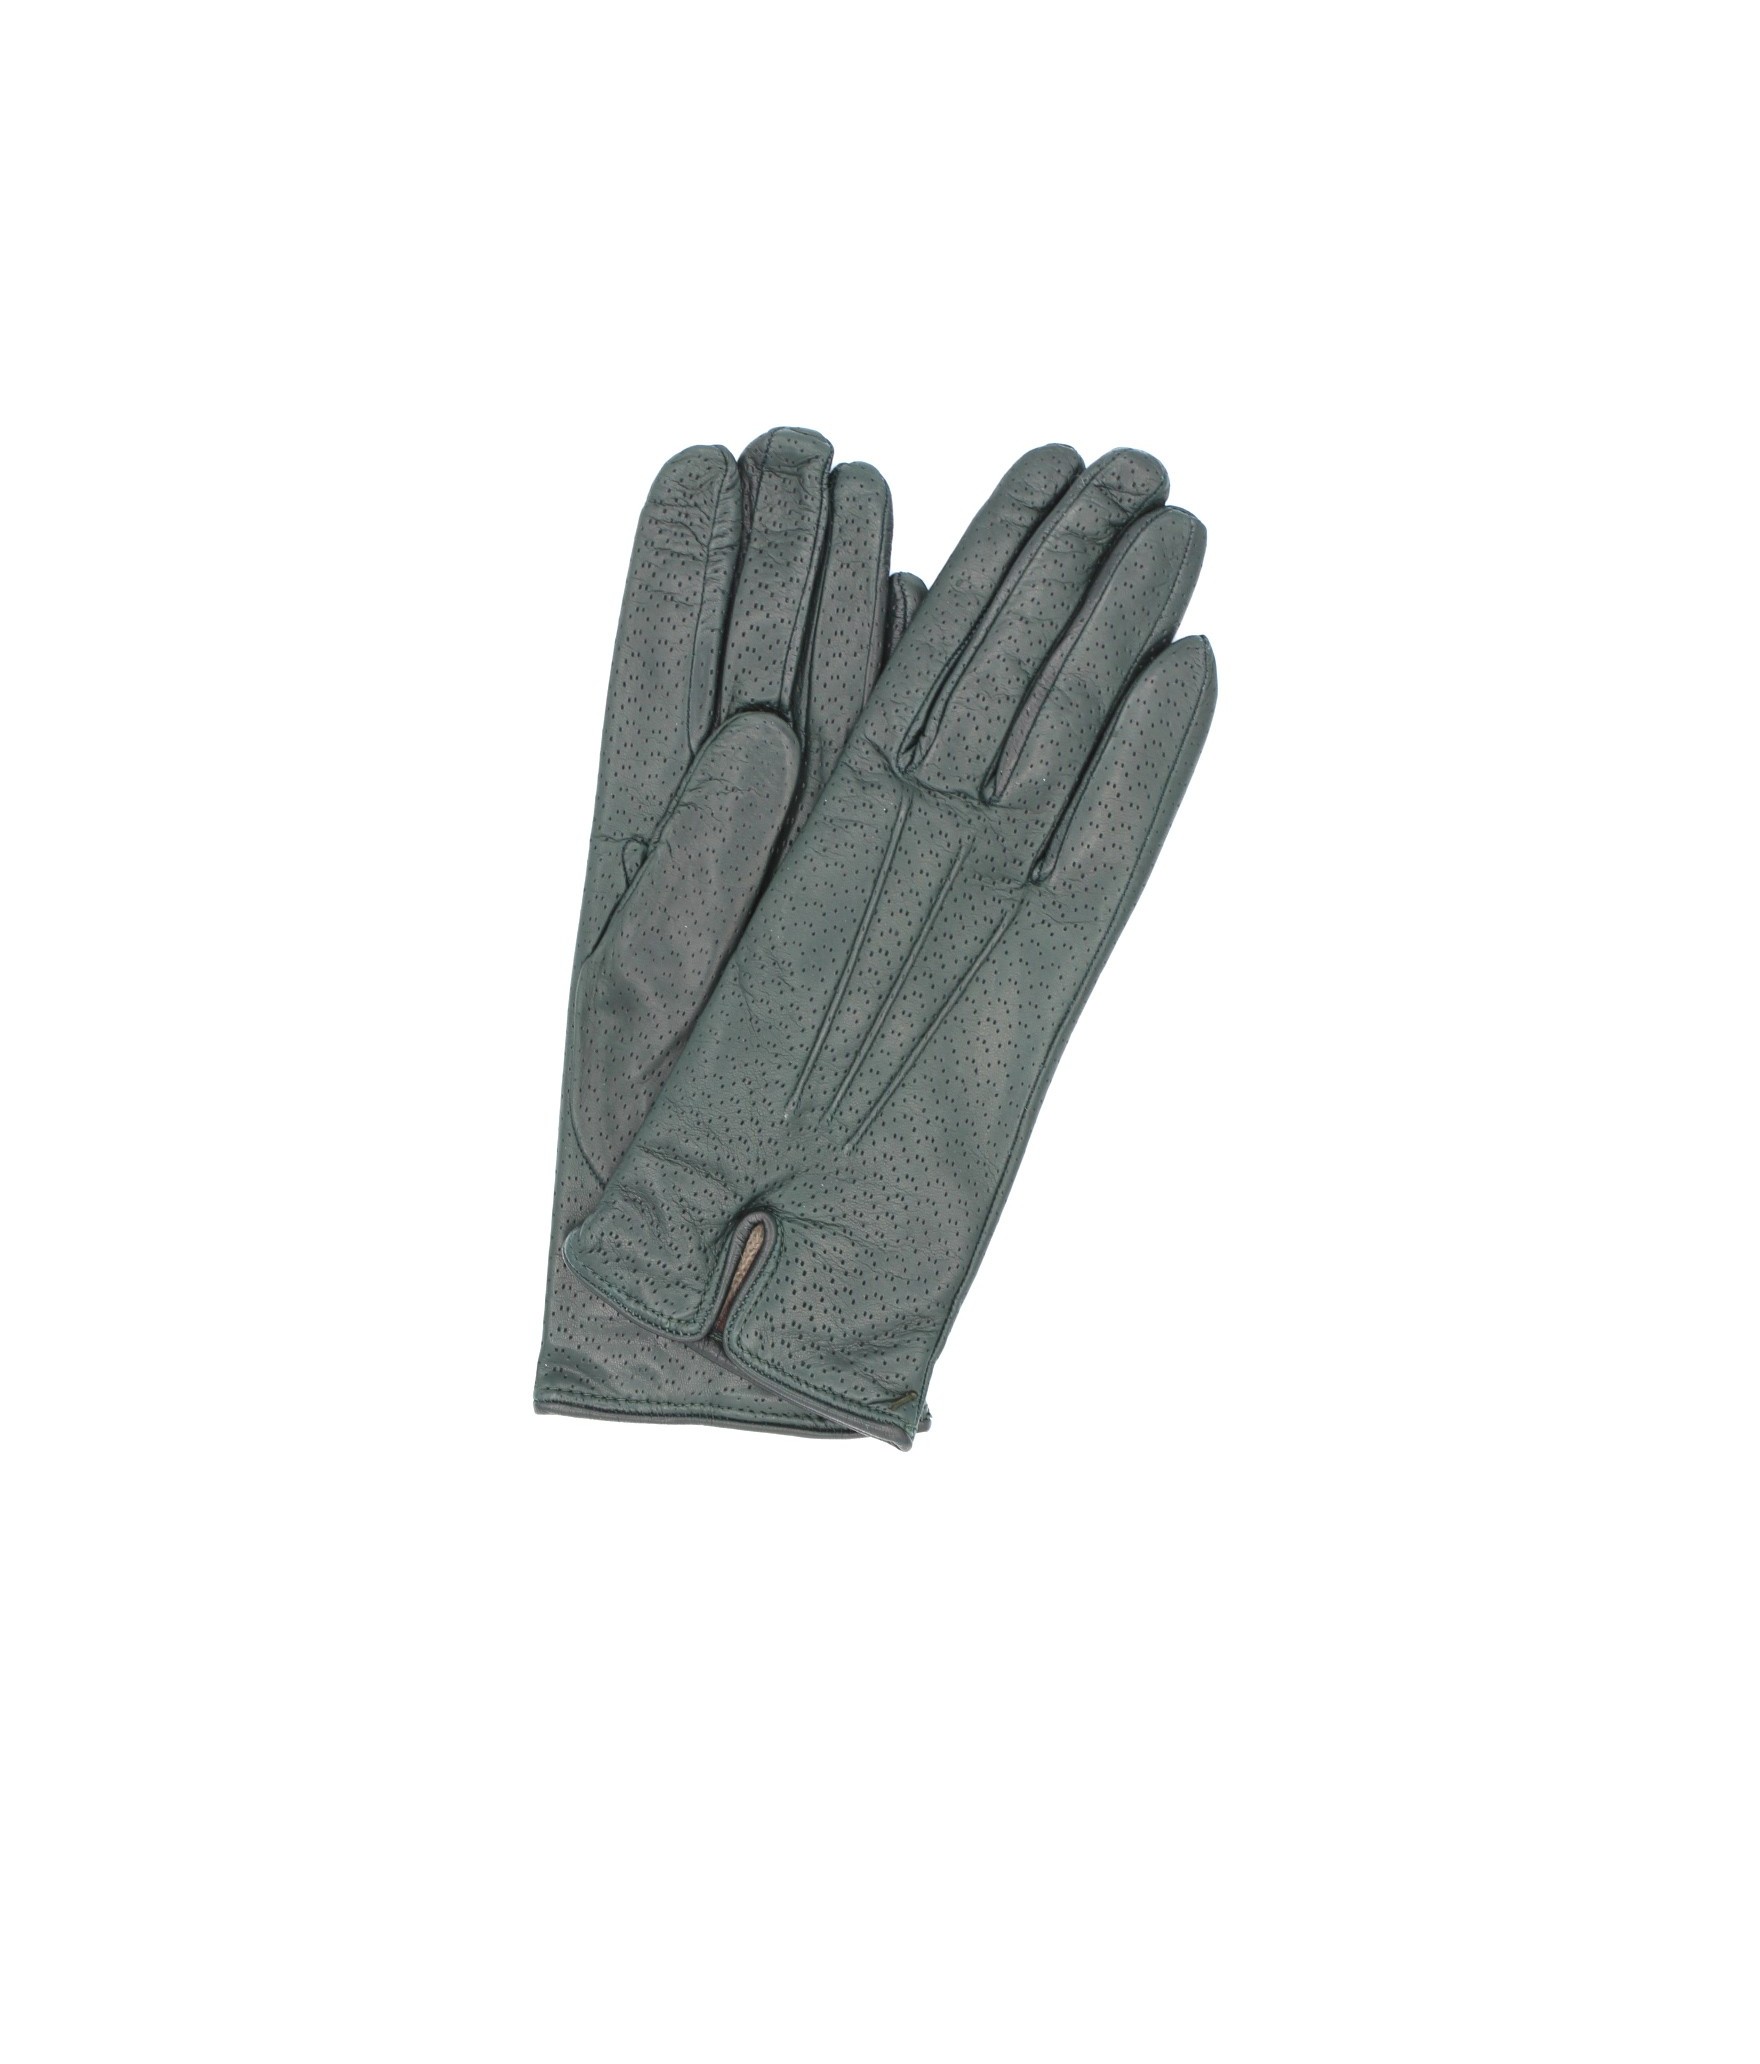 1922 Kid Leather Gloves Cashmere Lined Perf. Dark Green 